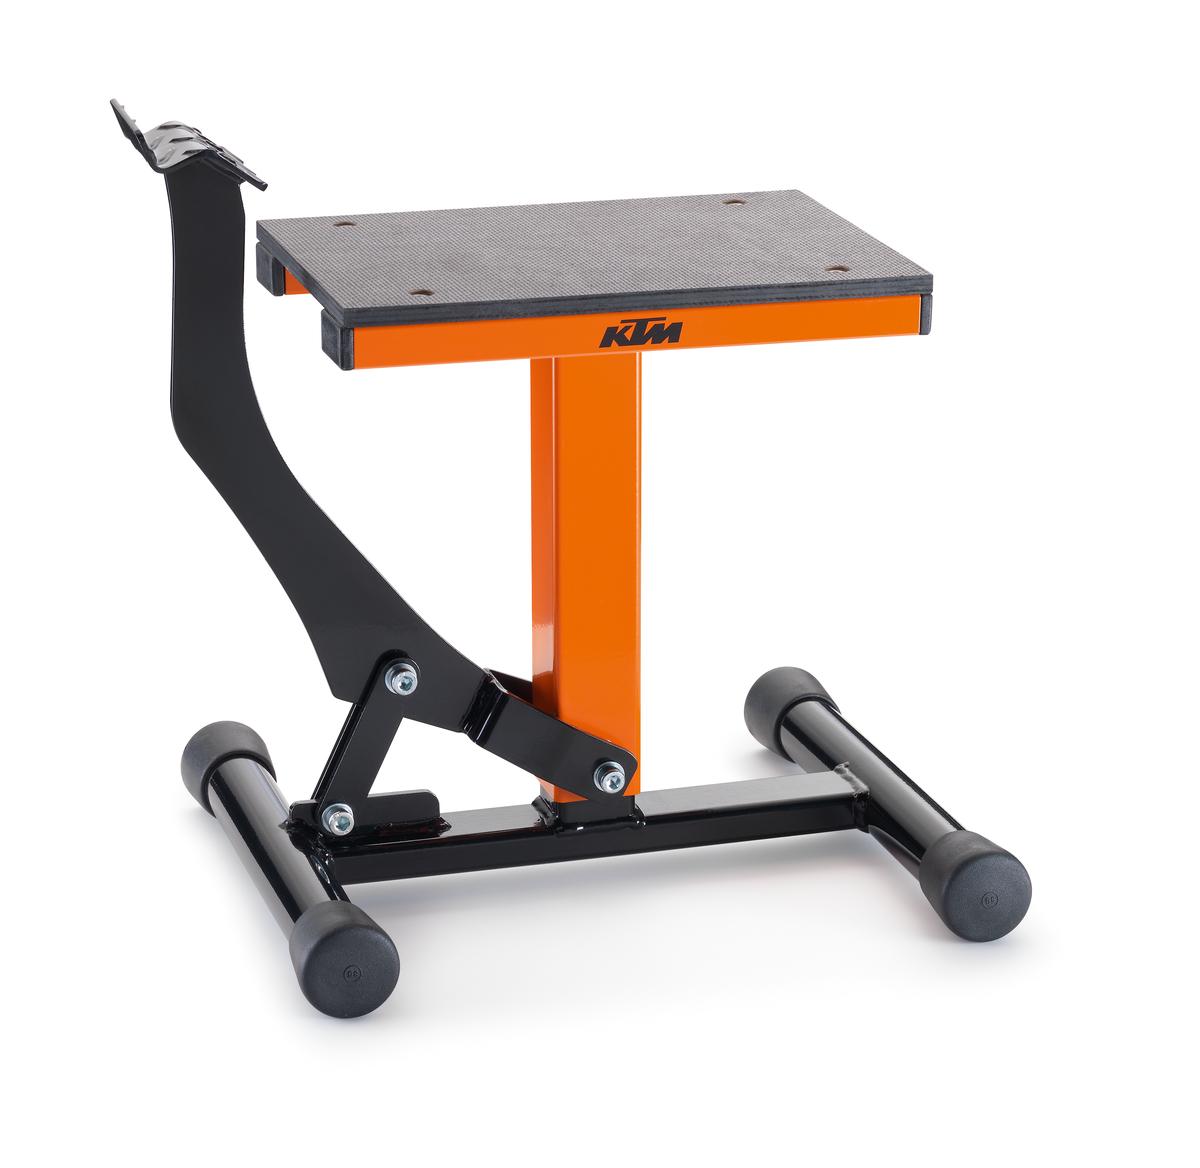 Main image of KTM Foot Lift Stand